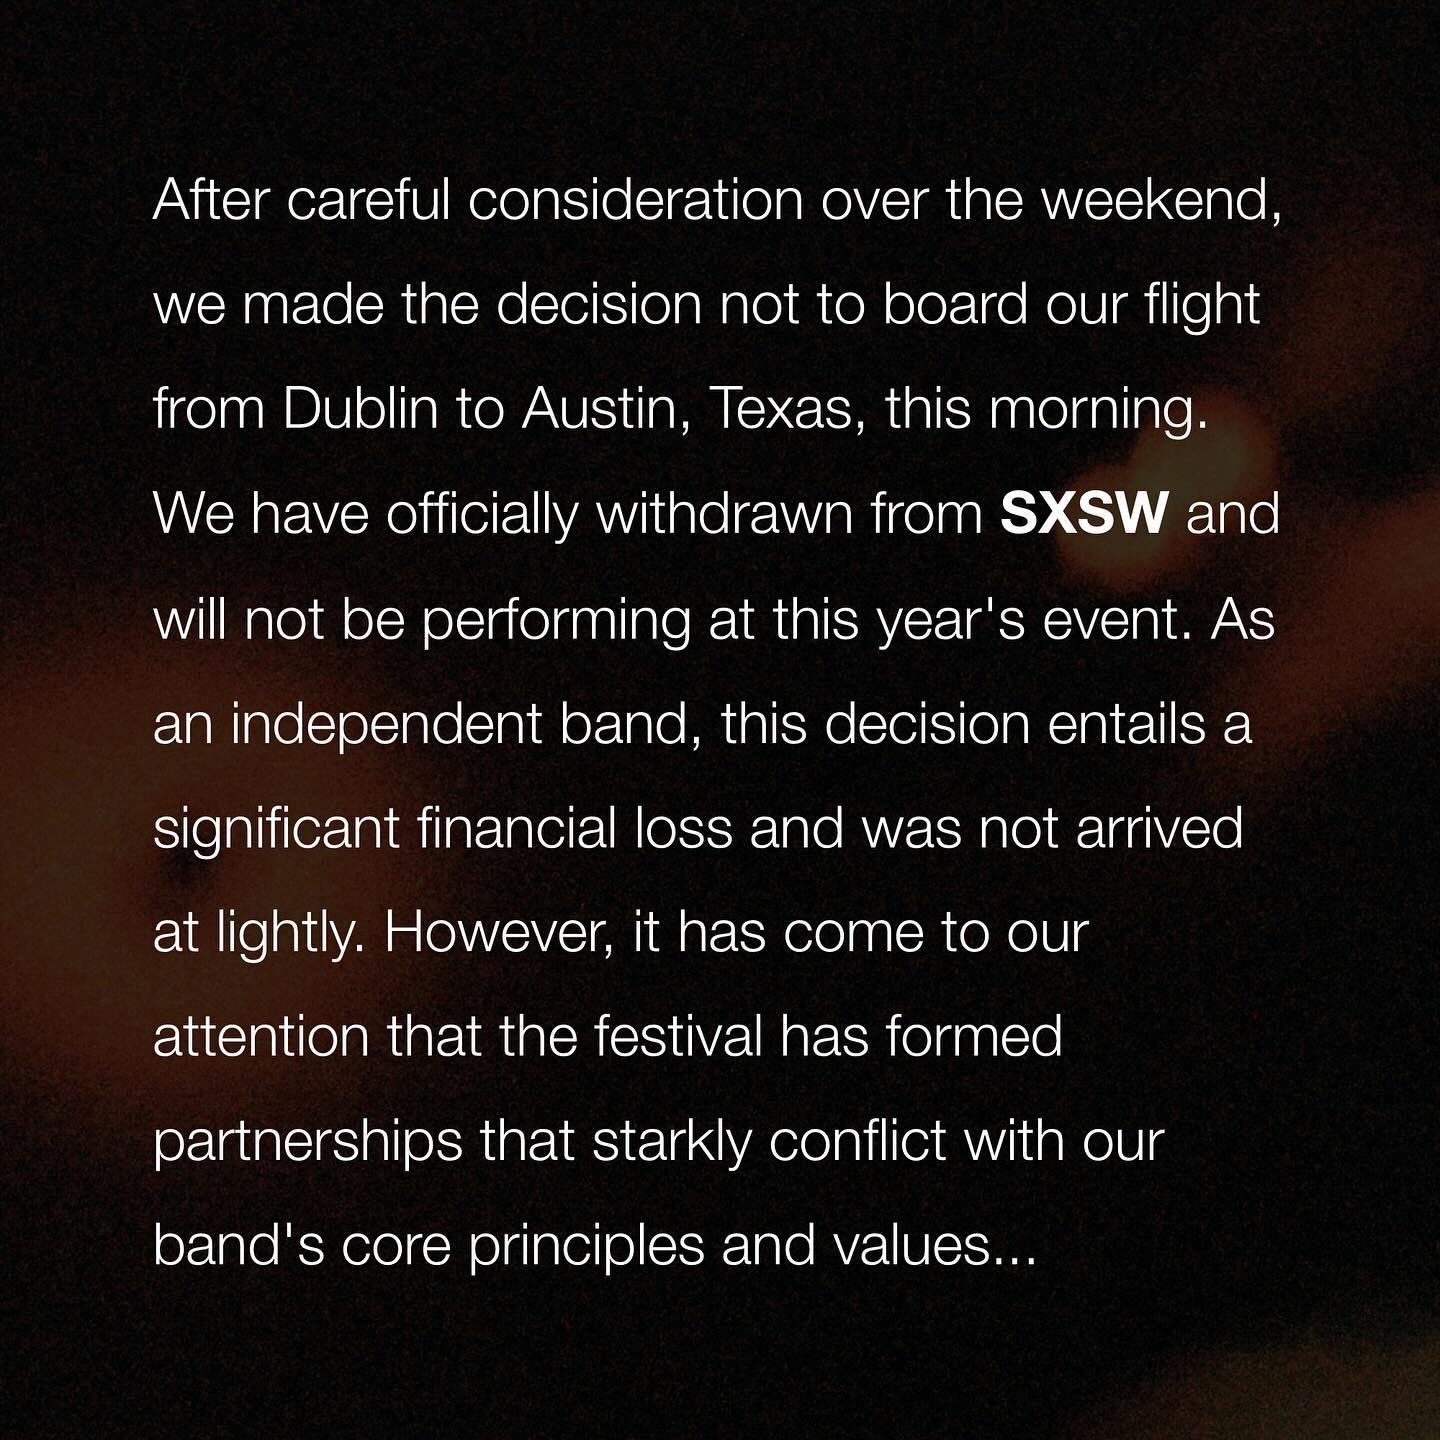 We have officially withdrawn from @sxsw